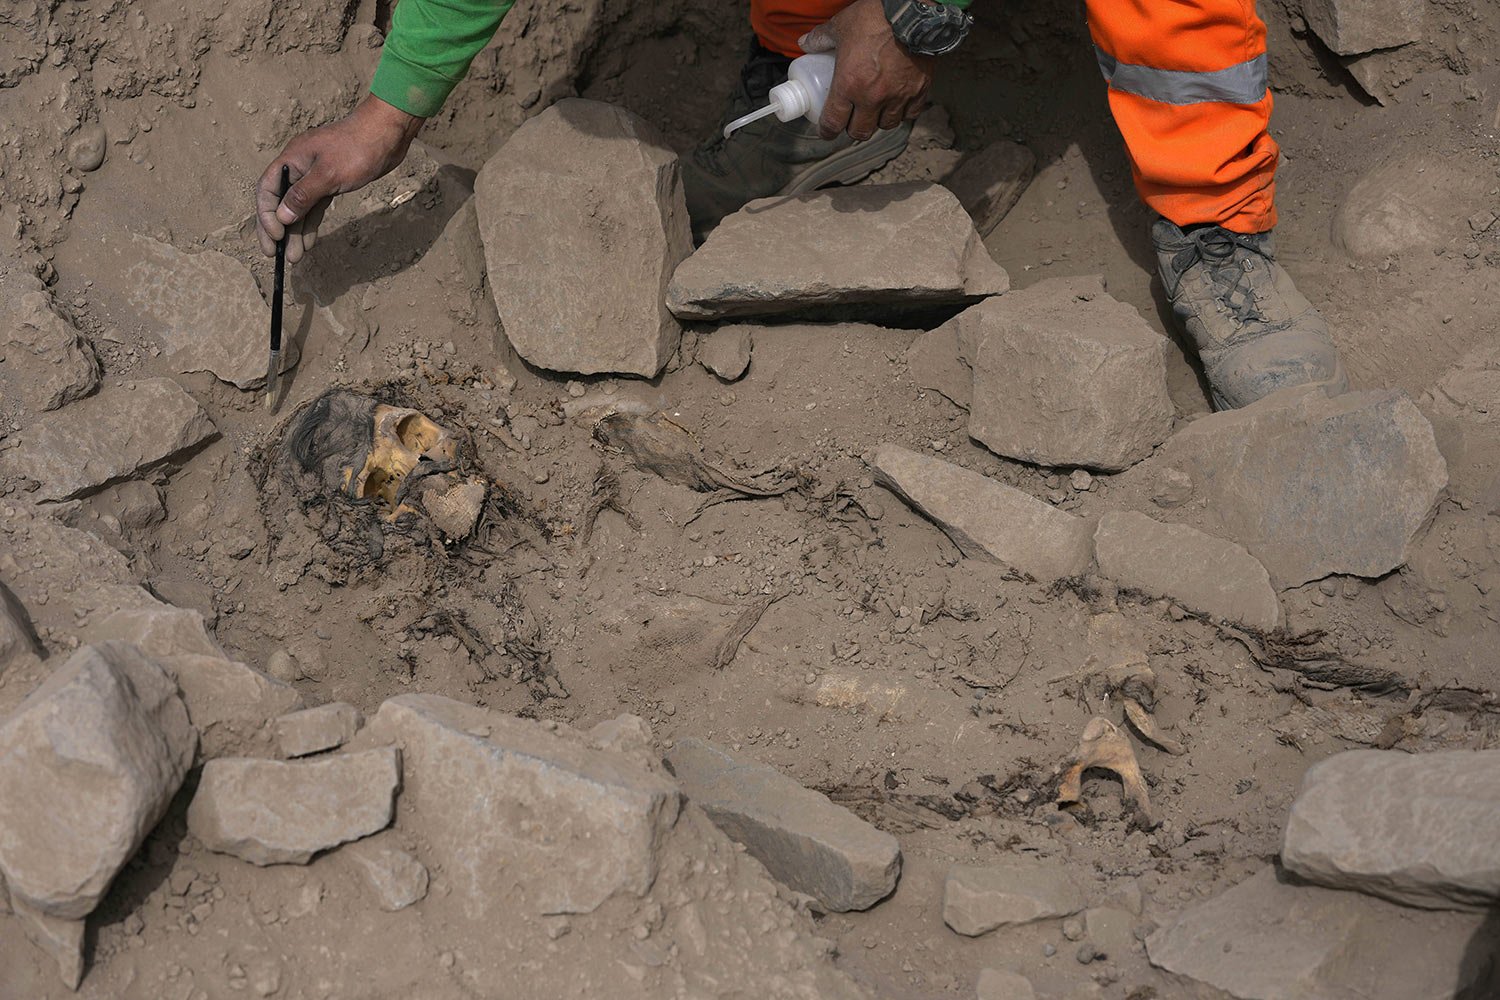  An archaeologist excavates a pre-Hispanic mummy that was discovered next to a training field for a Peruvian professional soccer team in the El Rimac neighborhood of Lima, Peru, June 15, 2023. (AP Photo/Martin Mejia) 